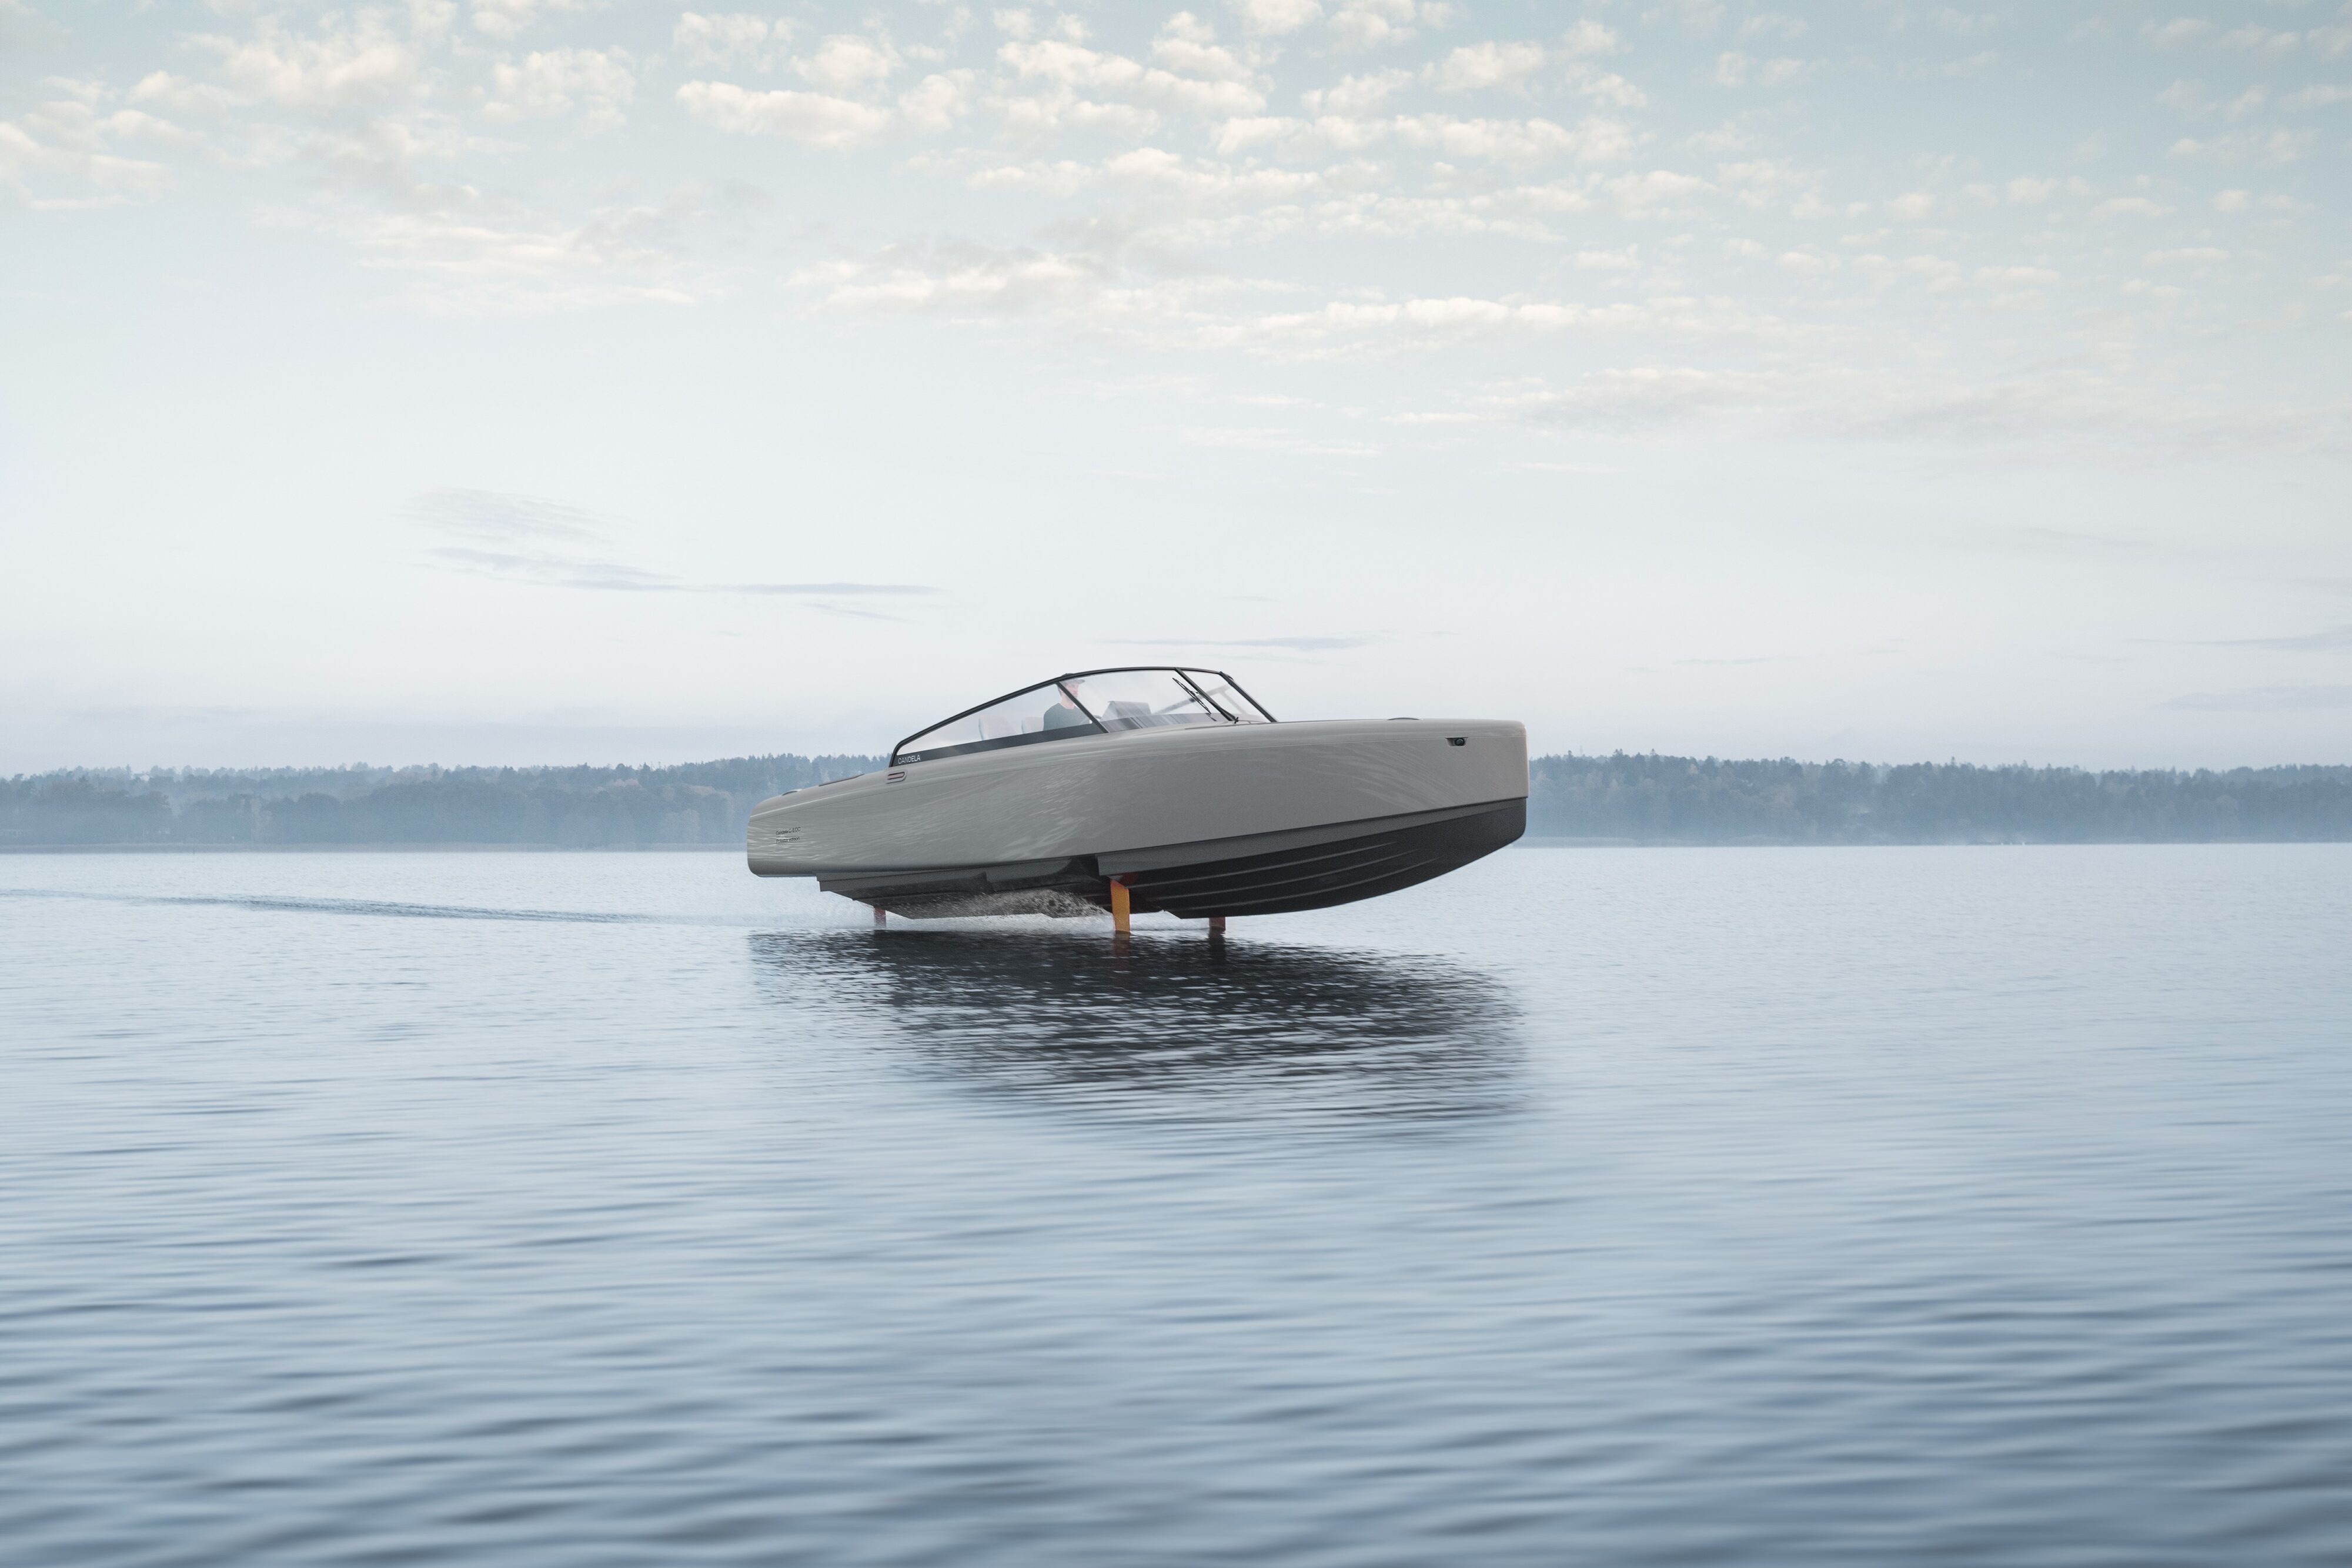 A shot of the Candela C-8 Polestar edition on the water